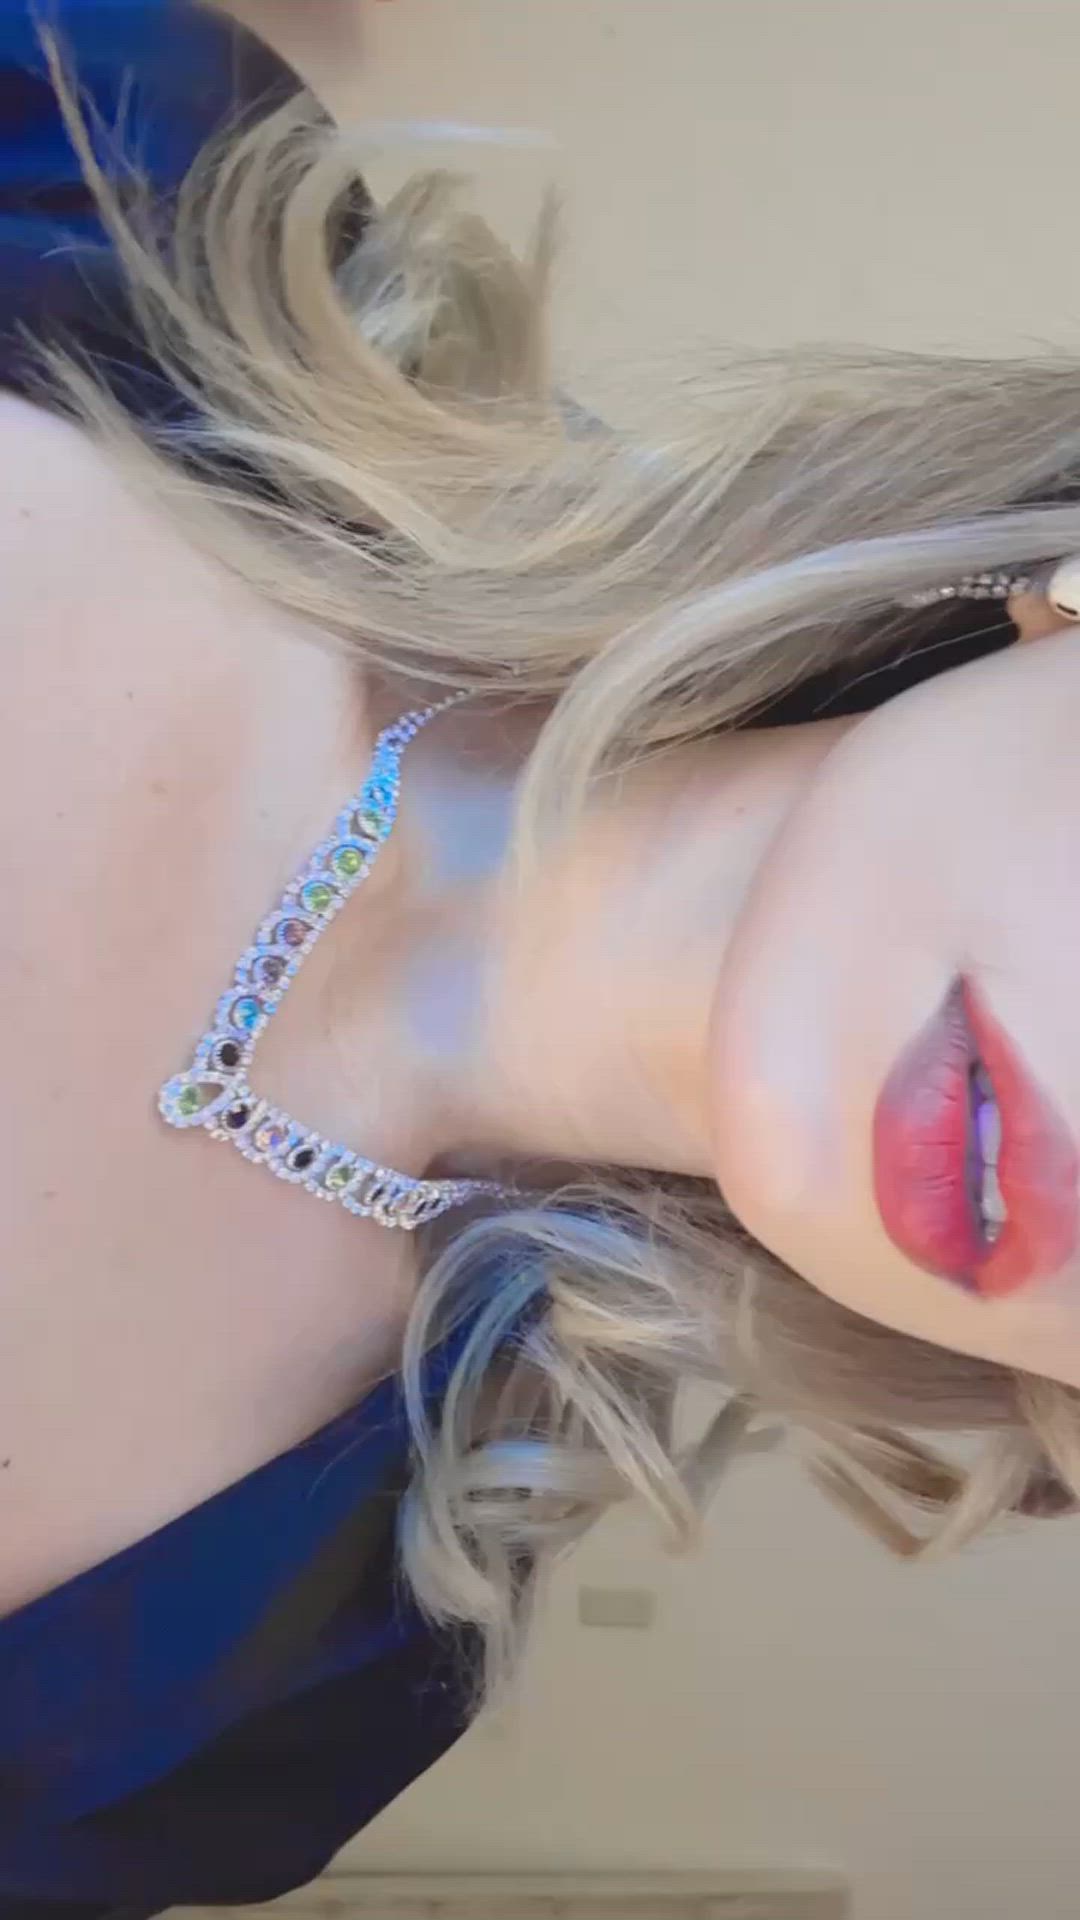 Chaturbate porn video with onlyfans model lamoreniitacb <strong>@lamoreniitacb</strong>